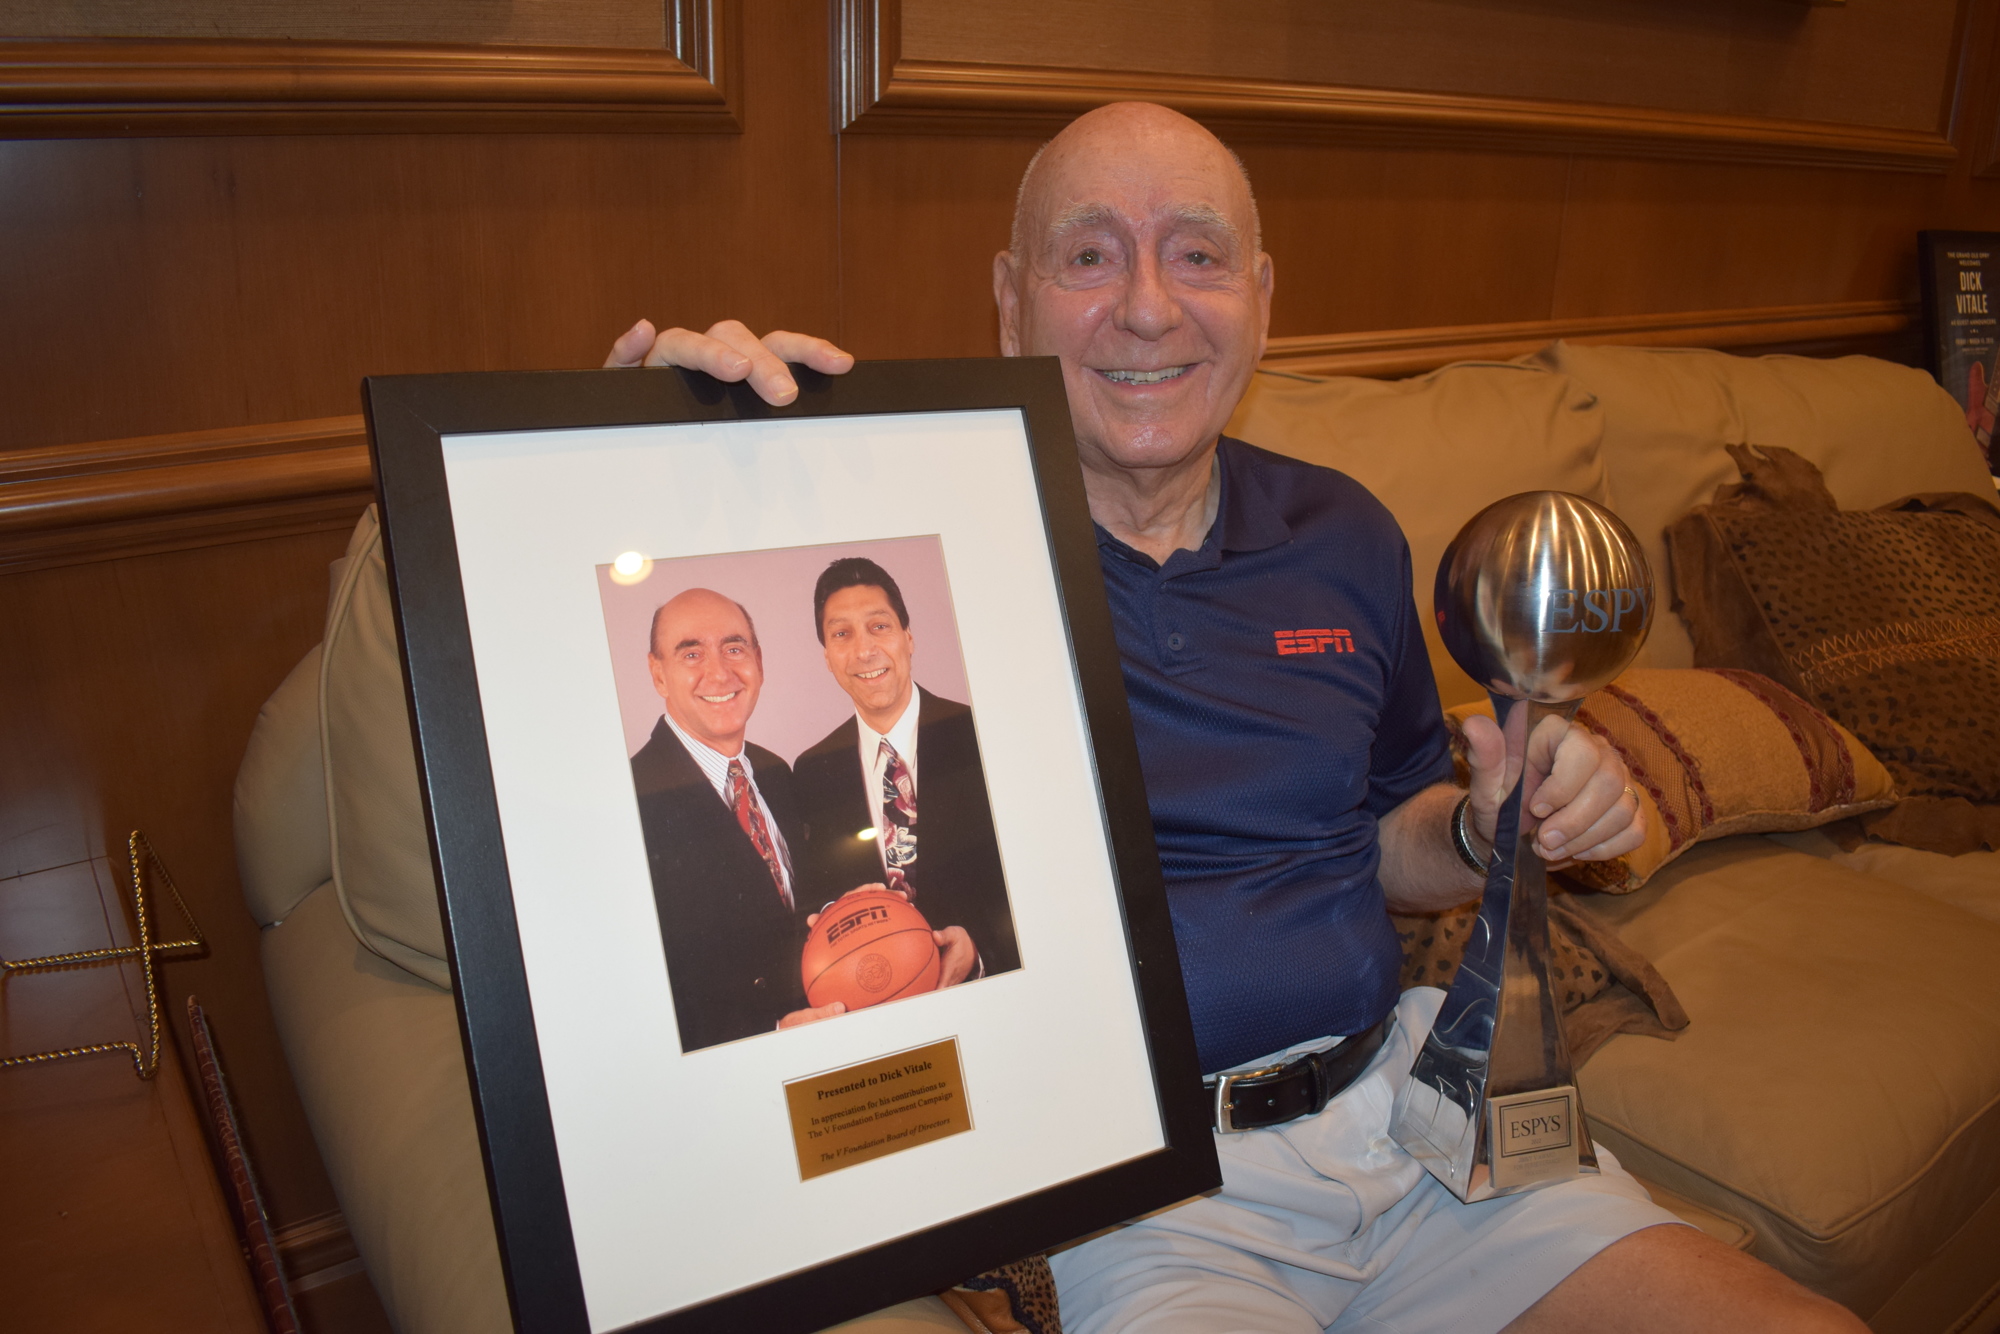 In July, Dick Vitale received the Jimmy V Award for Perseverance at the annual at the 2022 ESPYS.